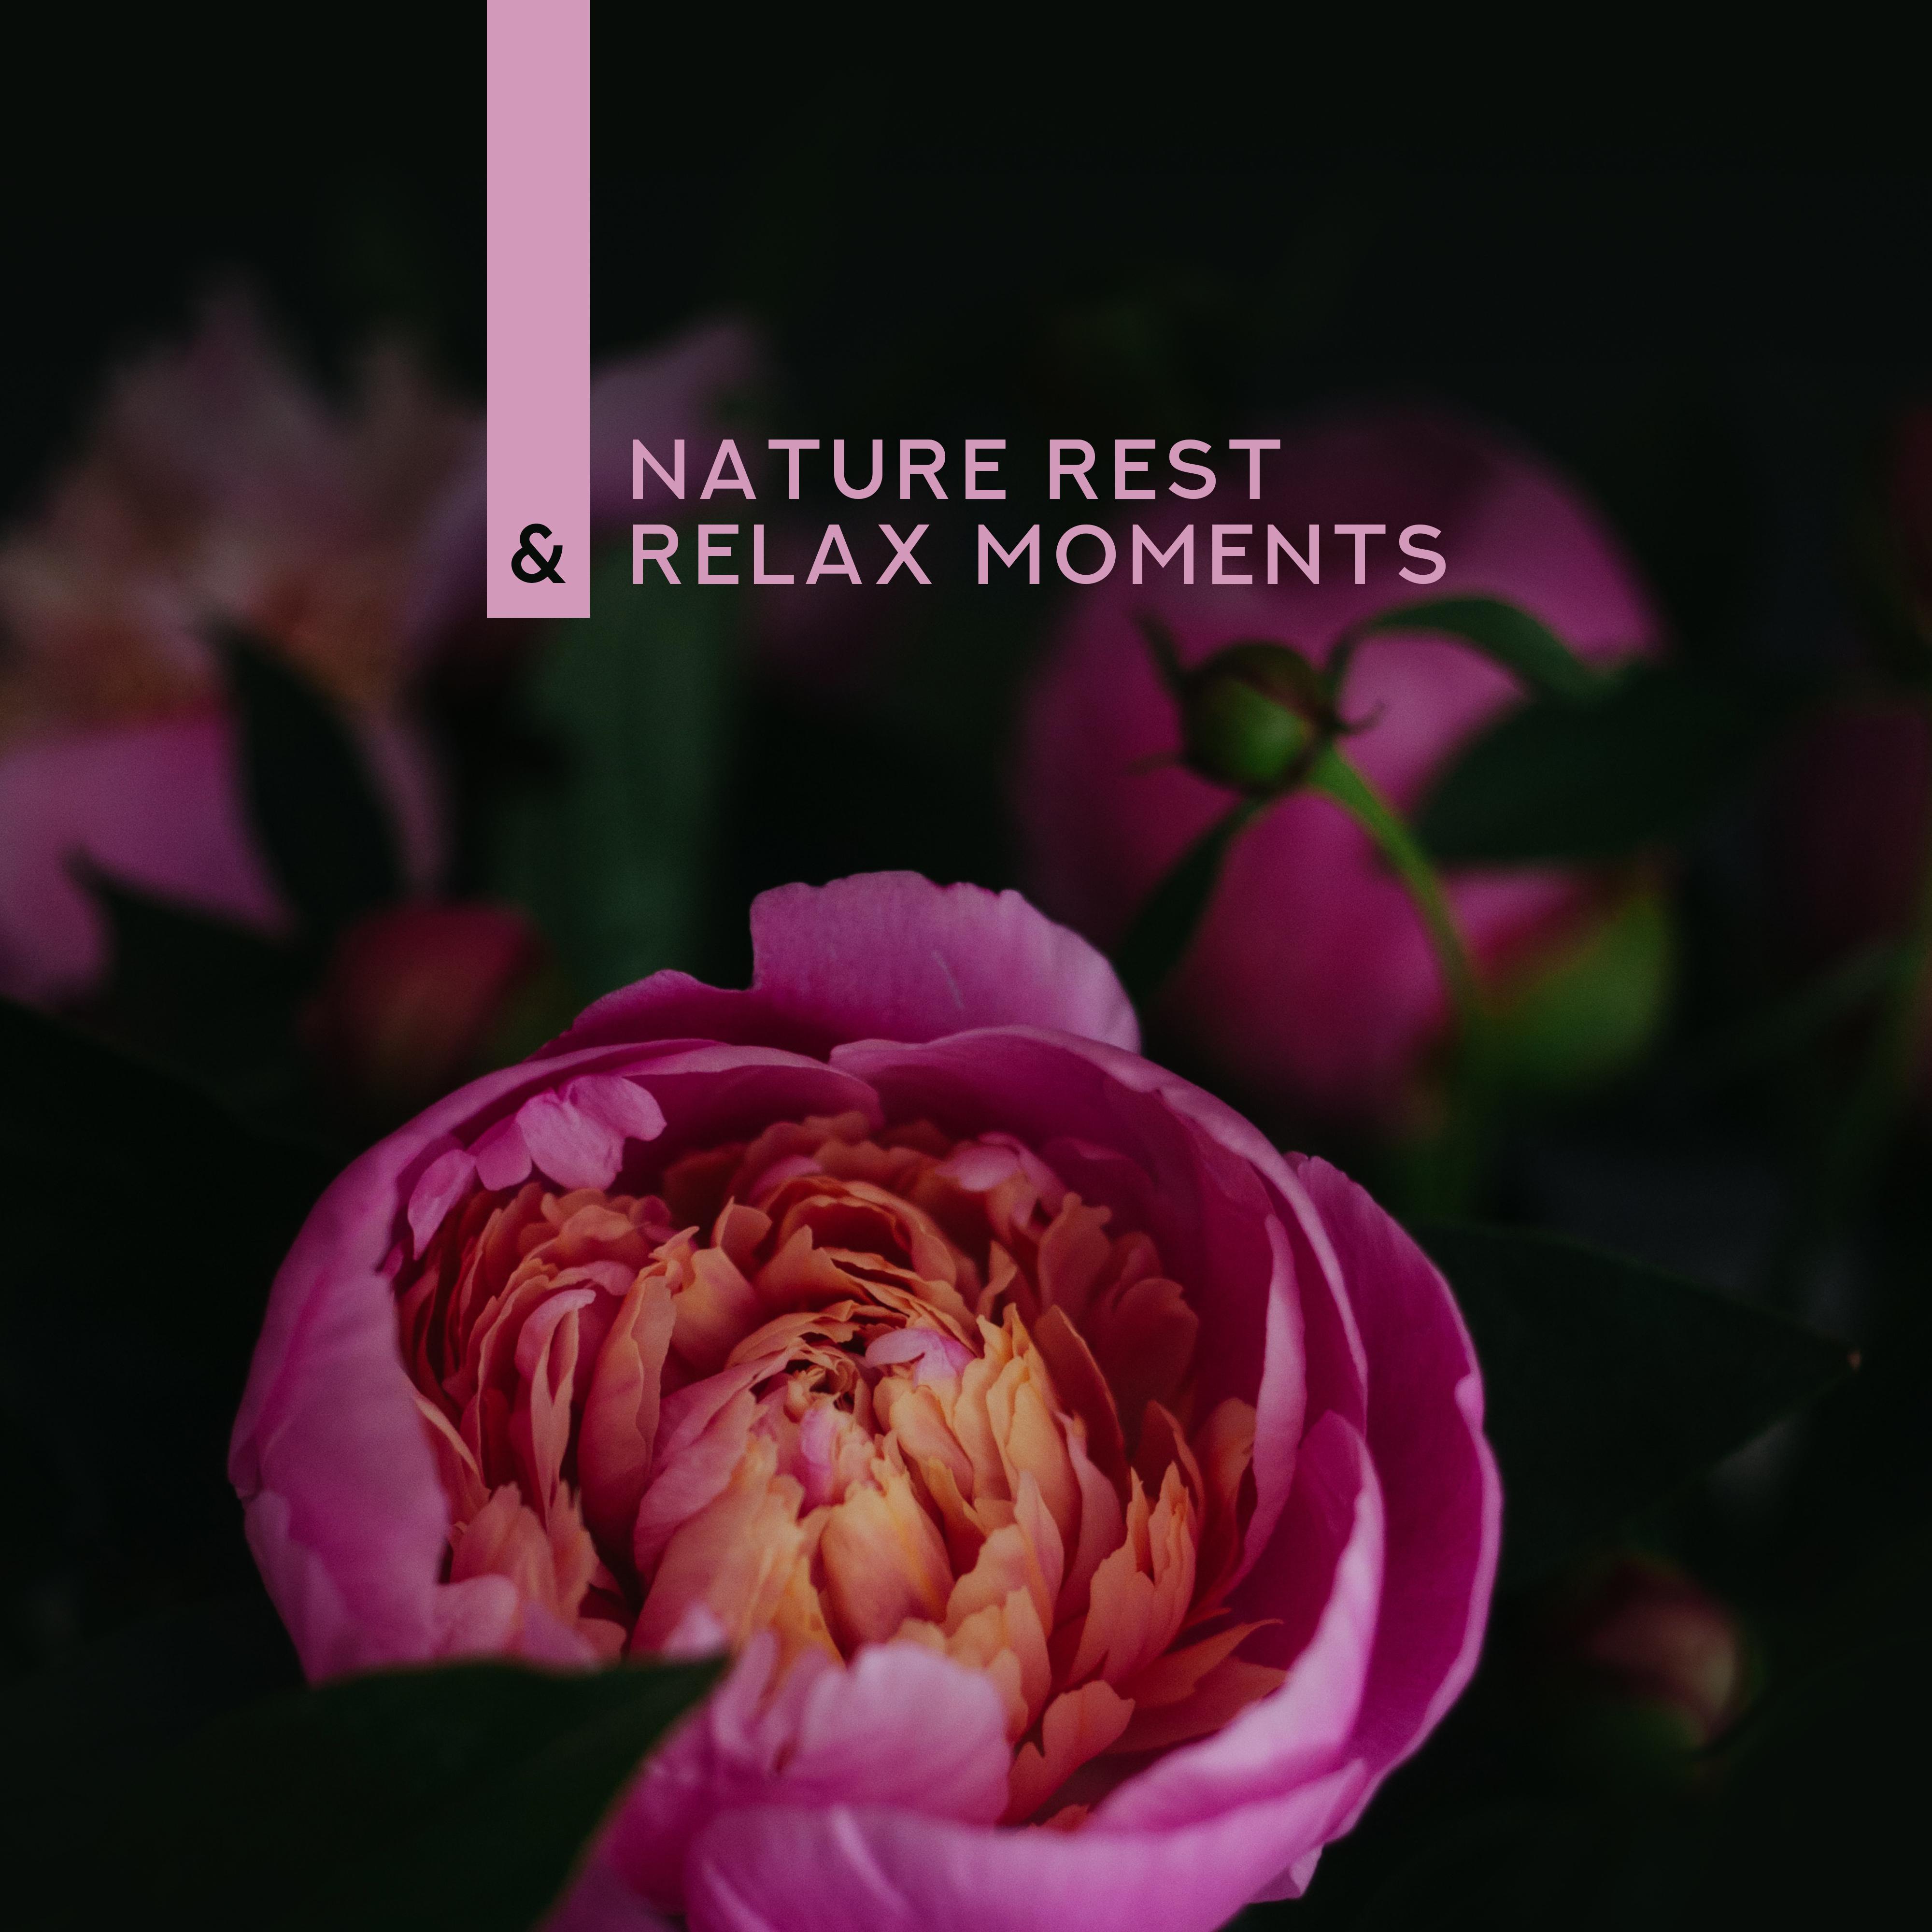 Nature Rest & Relax Moments: New Age Soothing 2019 Music Selection, Soft Sounds of Nature with Lovely Piano Melodies, Total Relaxation & Calming Down